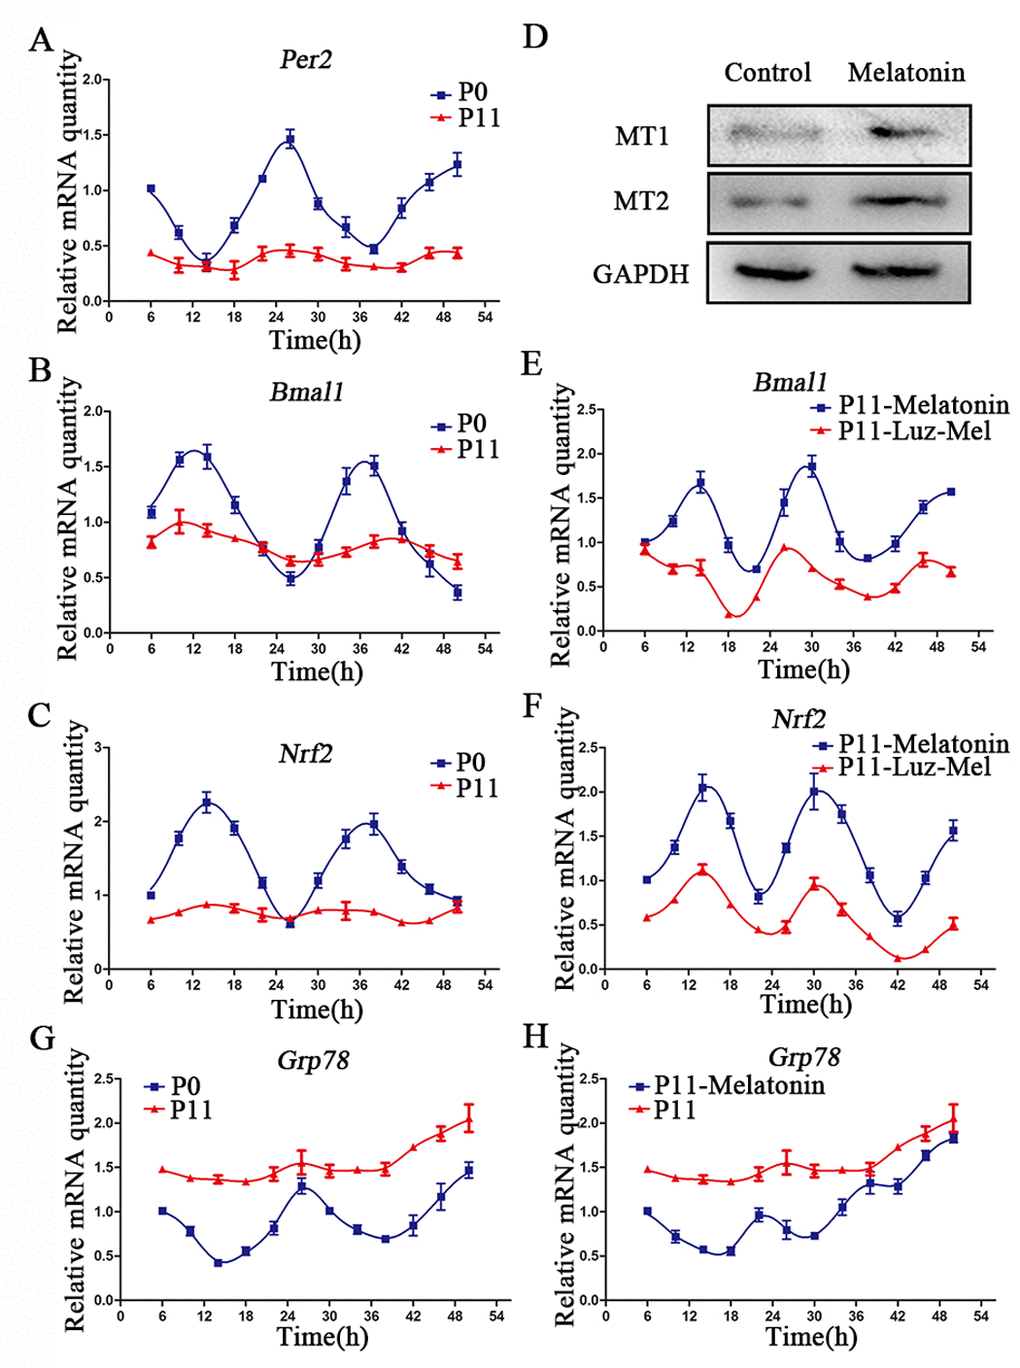 Melatonin promotes rhythmic expression of Nrf2. (A-C) Relative levels of Per2 (A) Bmal1 (B) and Nrf2 (C) in P0 and P11 cADMSCs. (D) Western blot quantification of MT1 and MT2 in control and melatonin-treated cADMSCs. (E-F) Relative levels of Bmal1 (E) and Nrf2 (F) in melatonin- and luzindole+melatonin-treated cADMSCs. (G-H) Relative levels of Grp78 in P0 and P11 (G) and melatonin-treated P11 (H) cADMSCs.